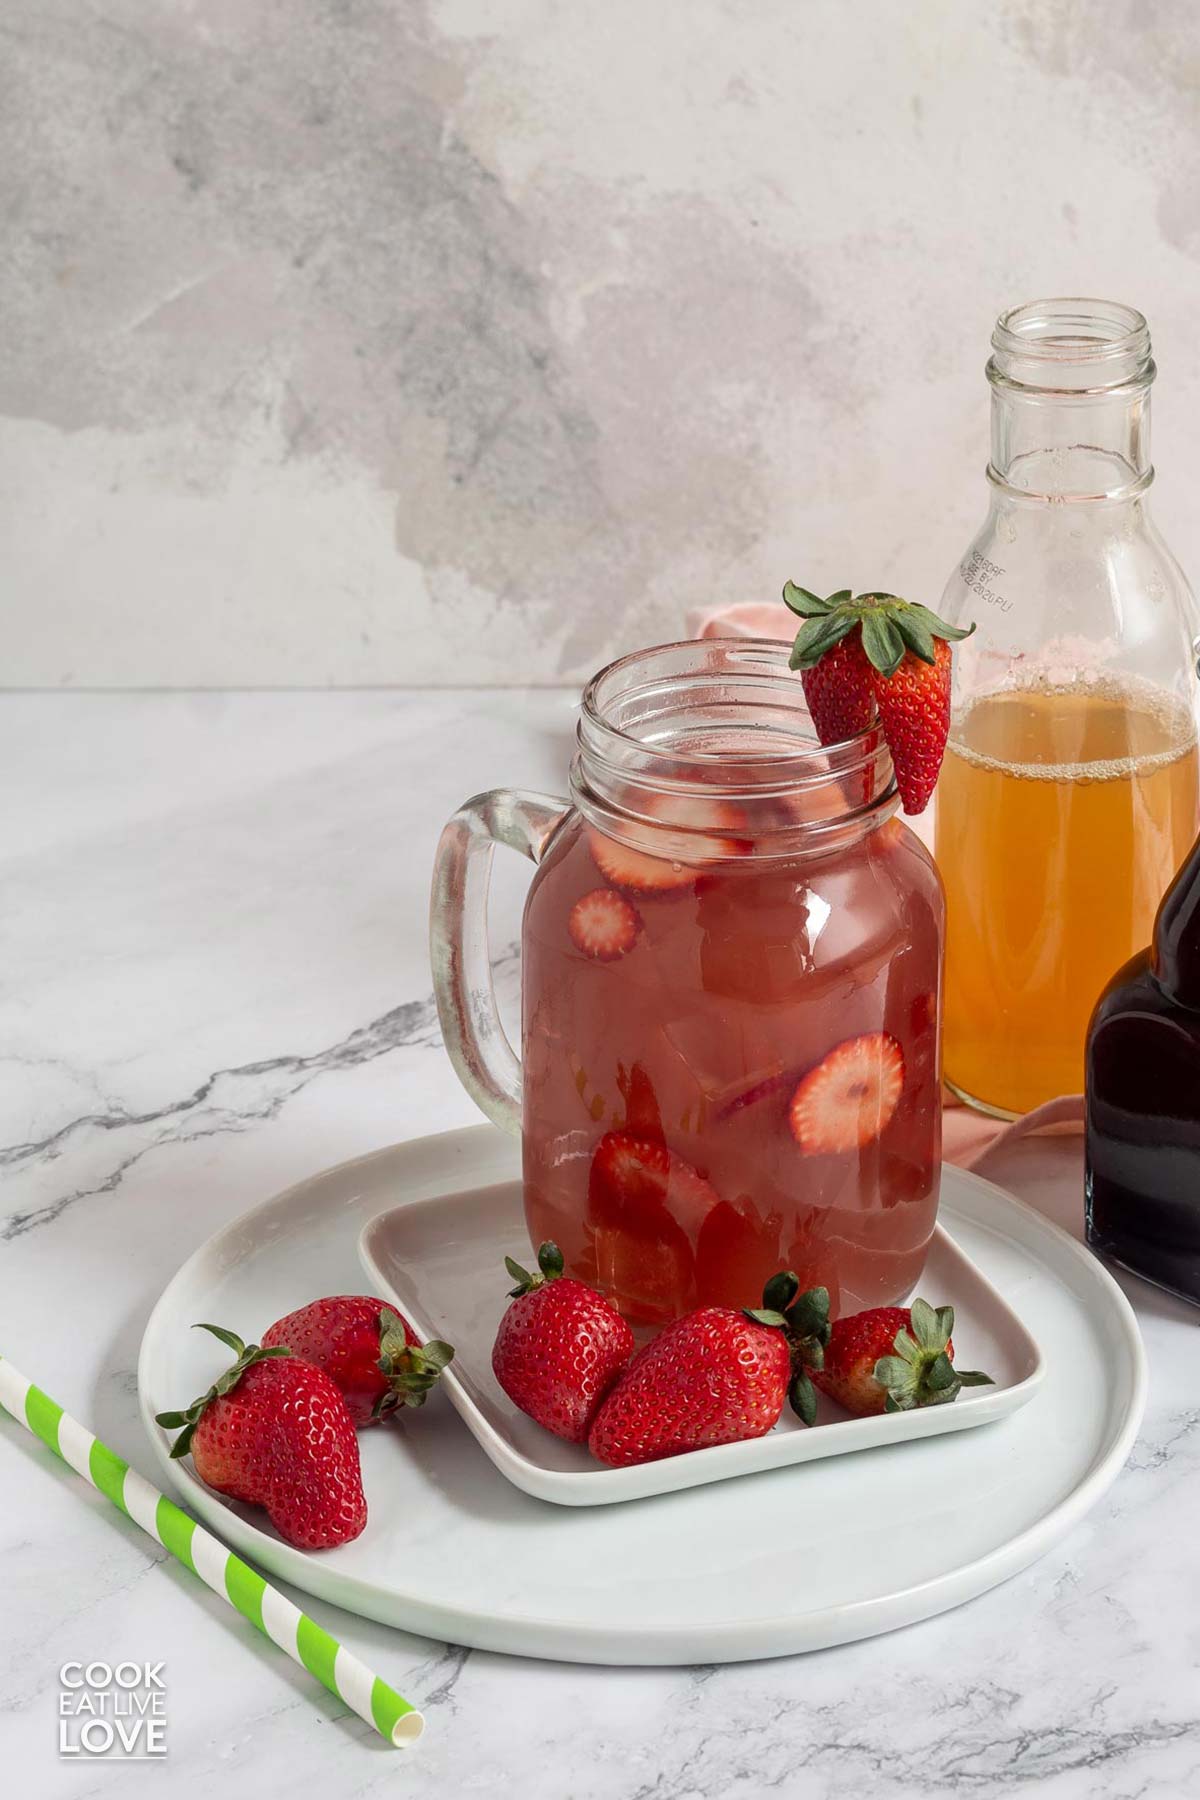 A glass of strawberry acai refresher on a plate with fresh strawberries and jar of syrup and green tea in the back.